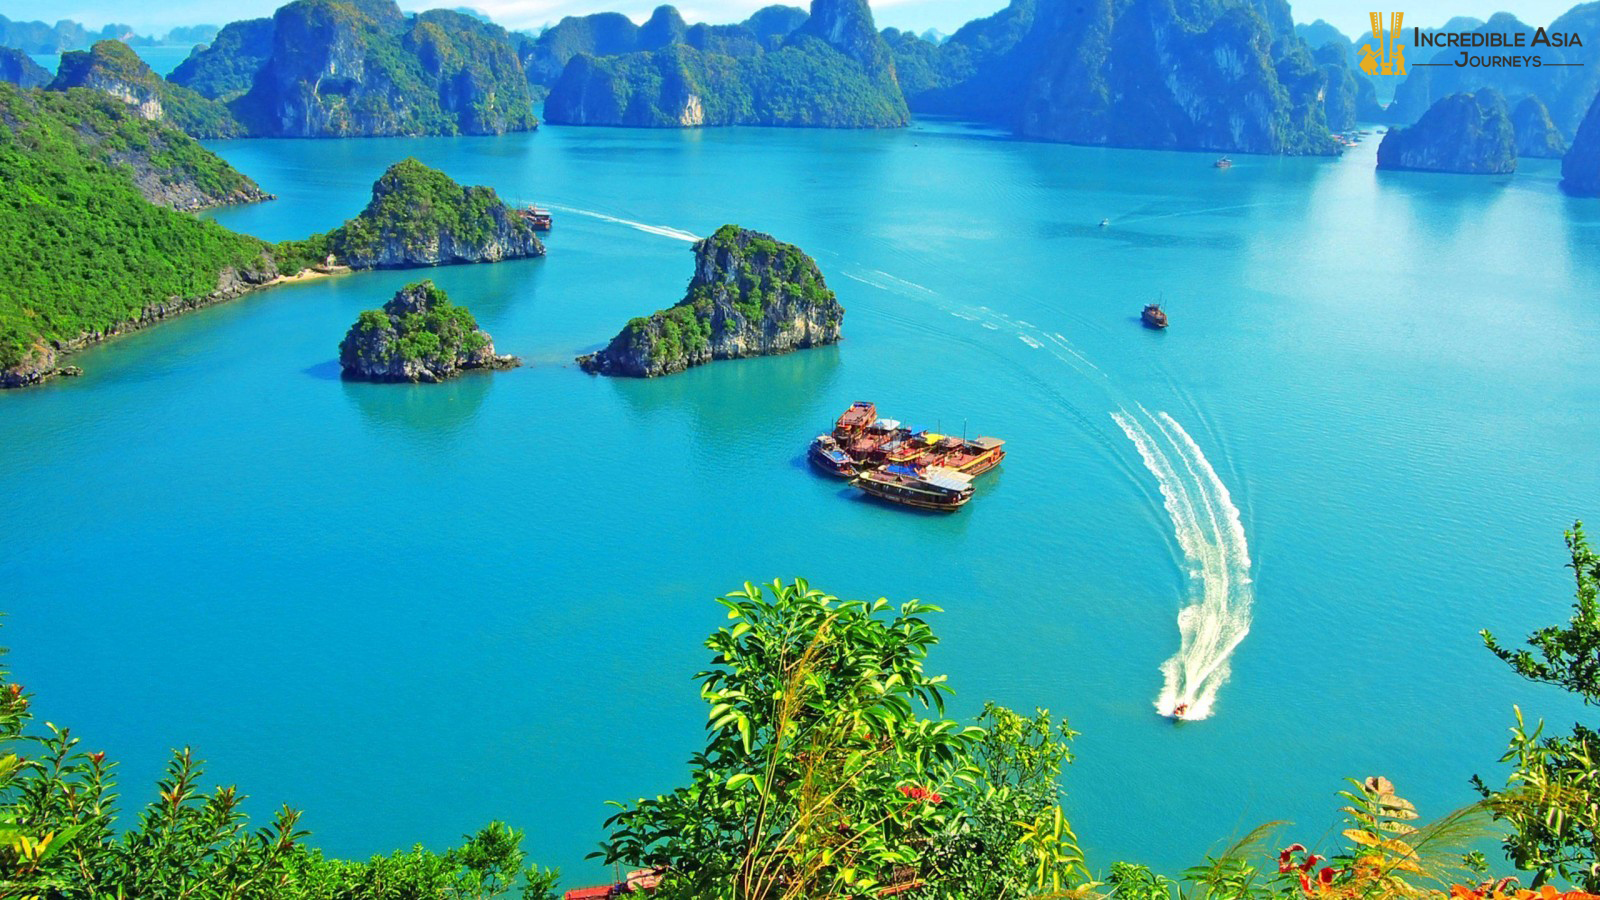 How long to spend in Halong Bay?